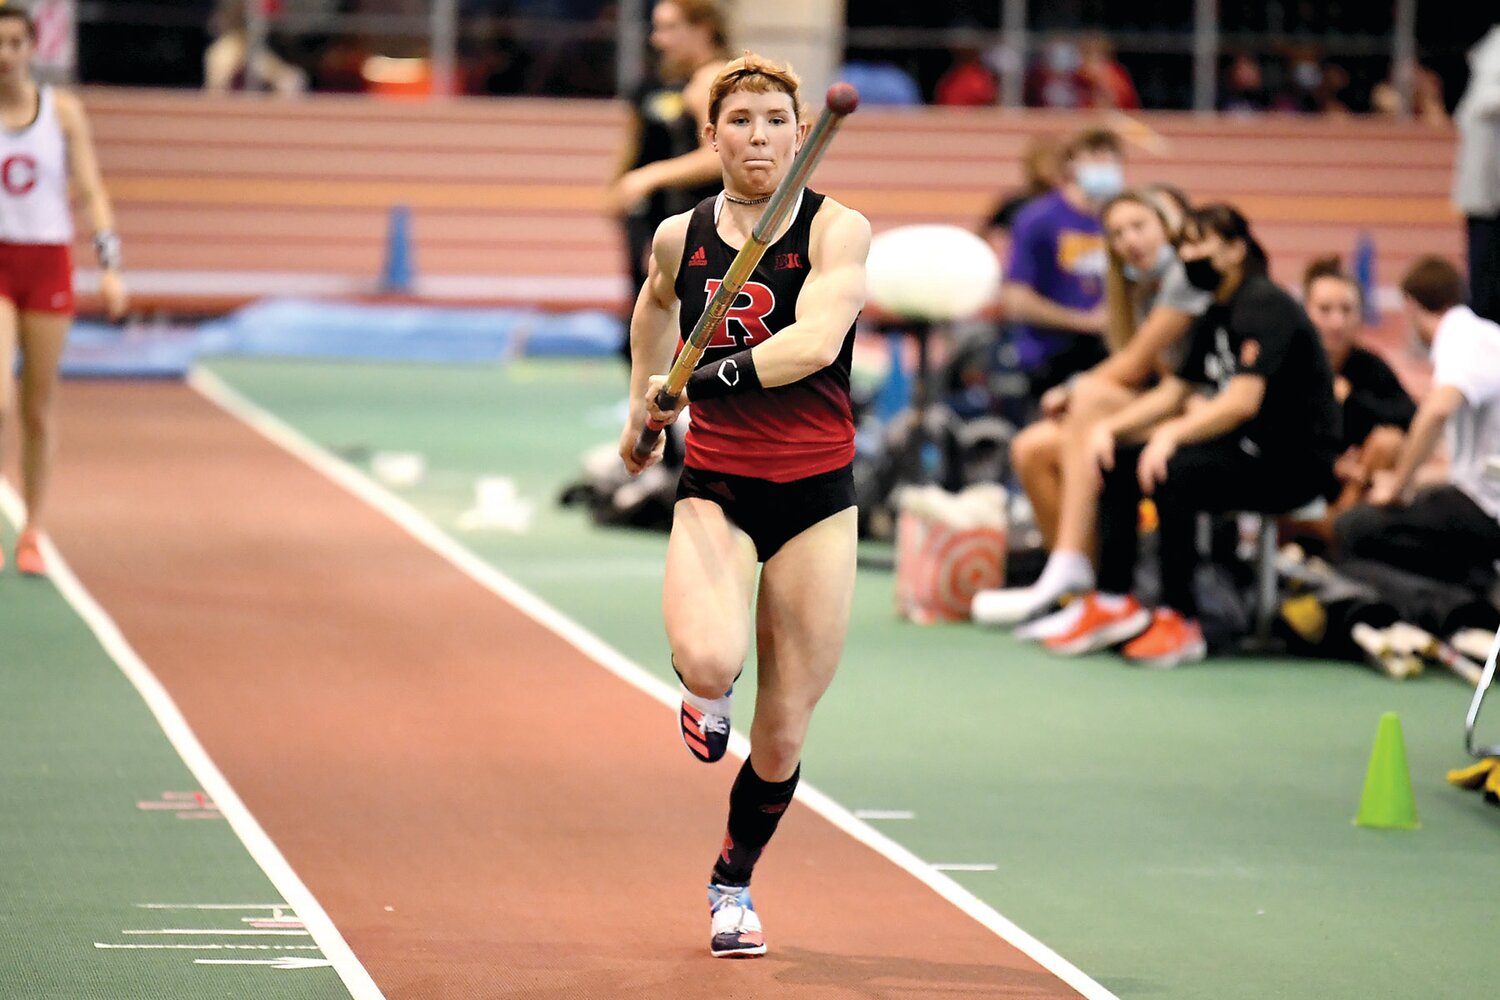 After setting the Pennsylvania high school pole vaulting record by being the first girl to clear 14 feet, CB West star Chloe Timberg has gone on to win the the 2022 and 2023 Big Ten Outdoor Championships and the 2023 Big Ten Indoor Championships for Rutgers University. In June she competed at the NCAA championships.